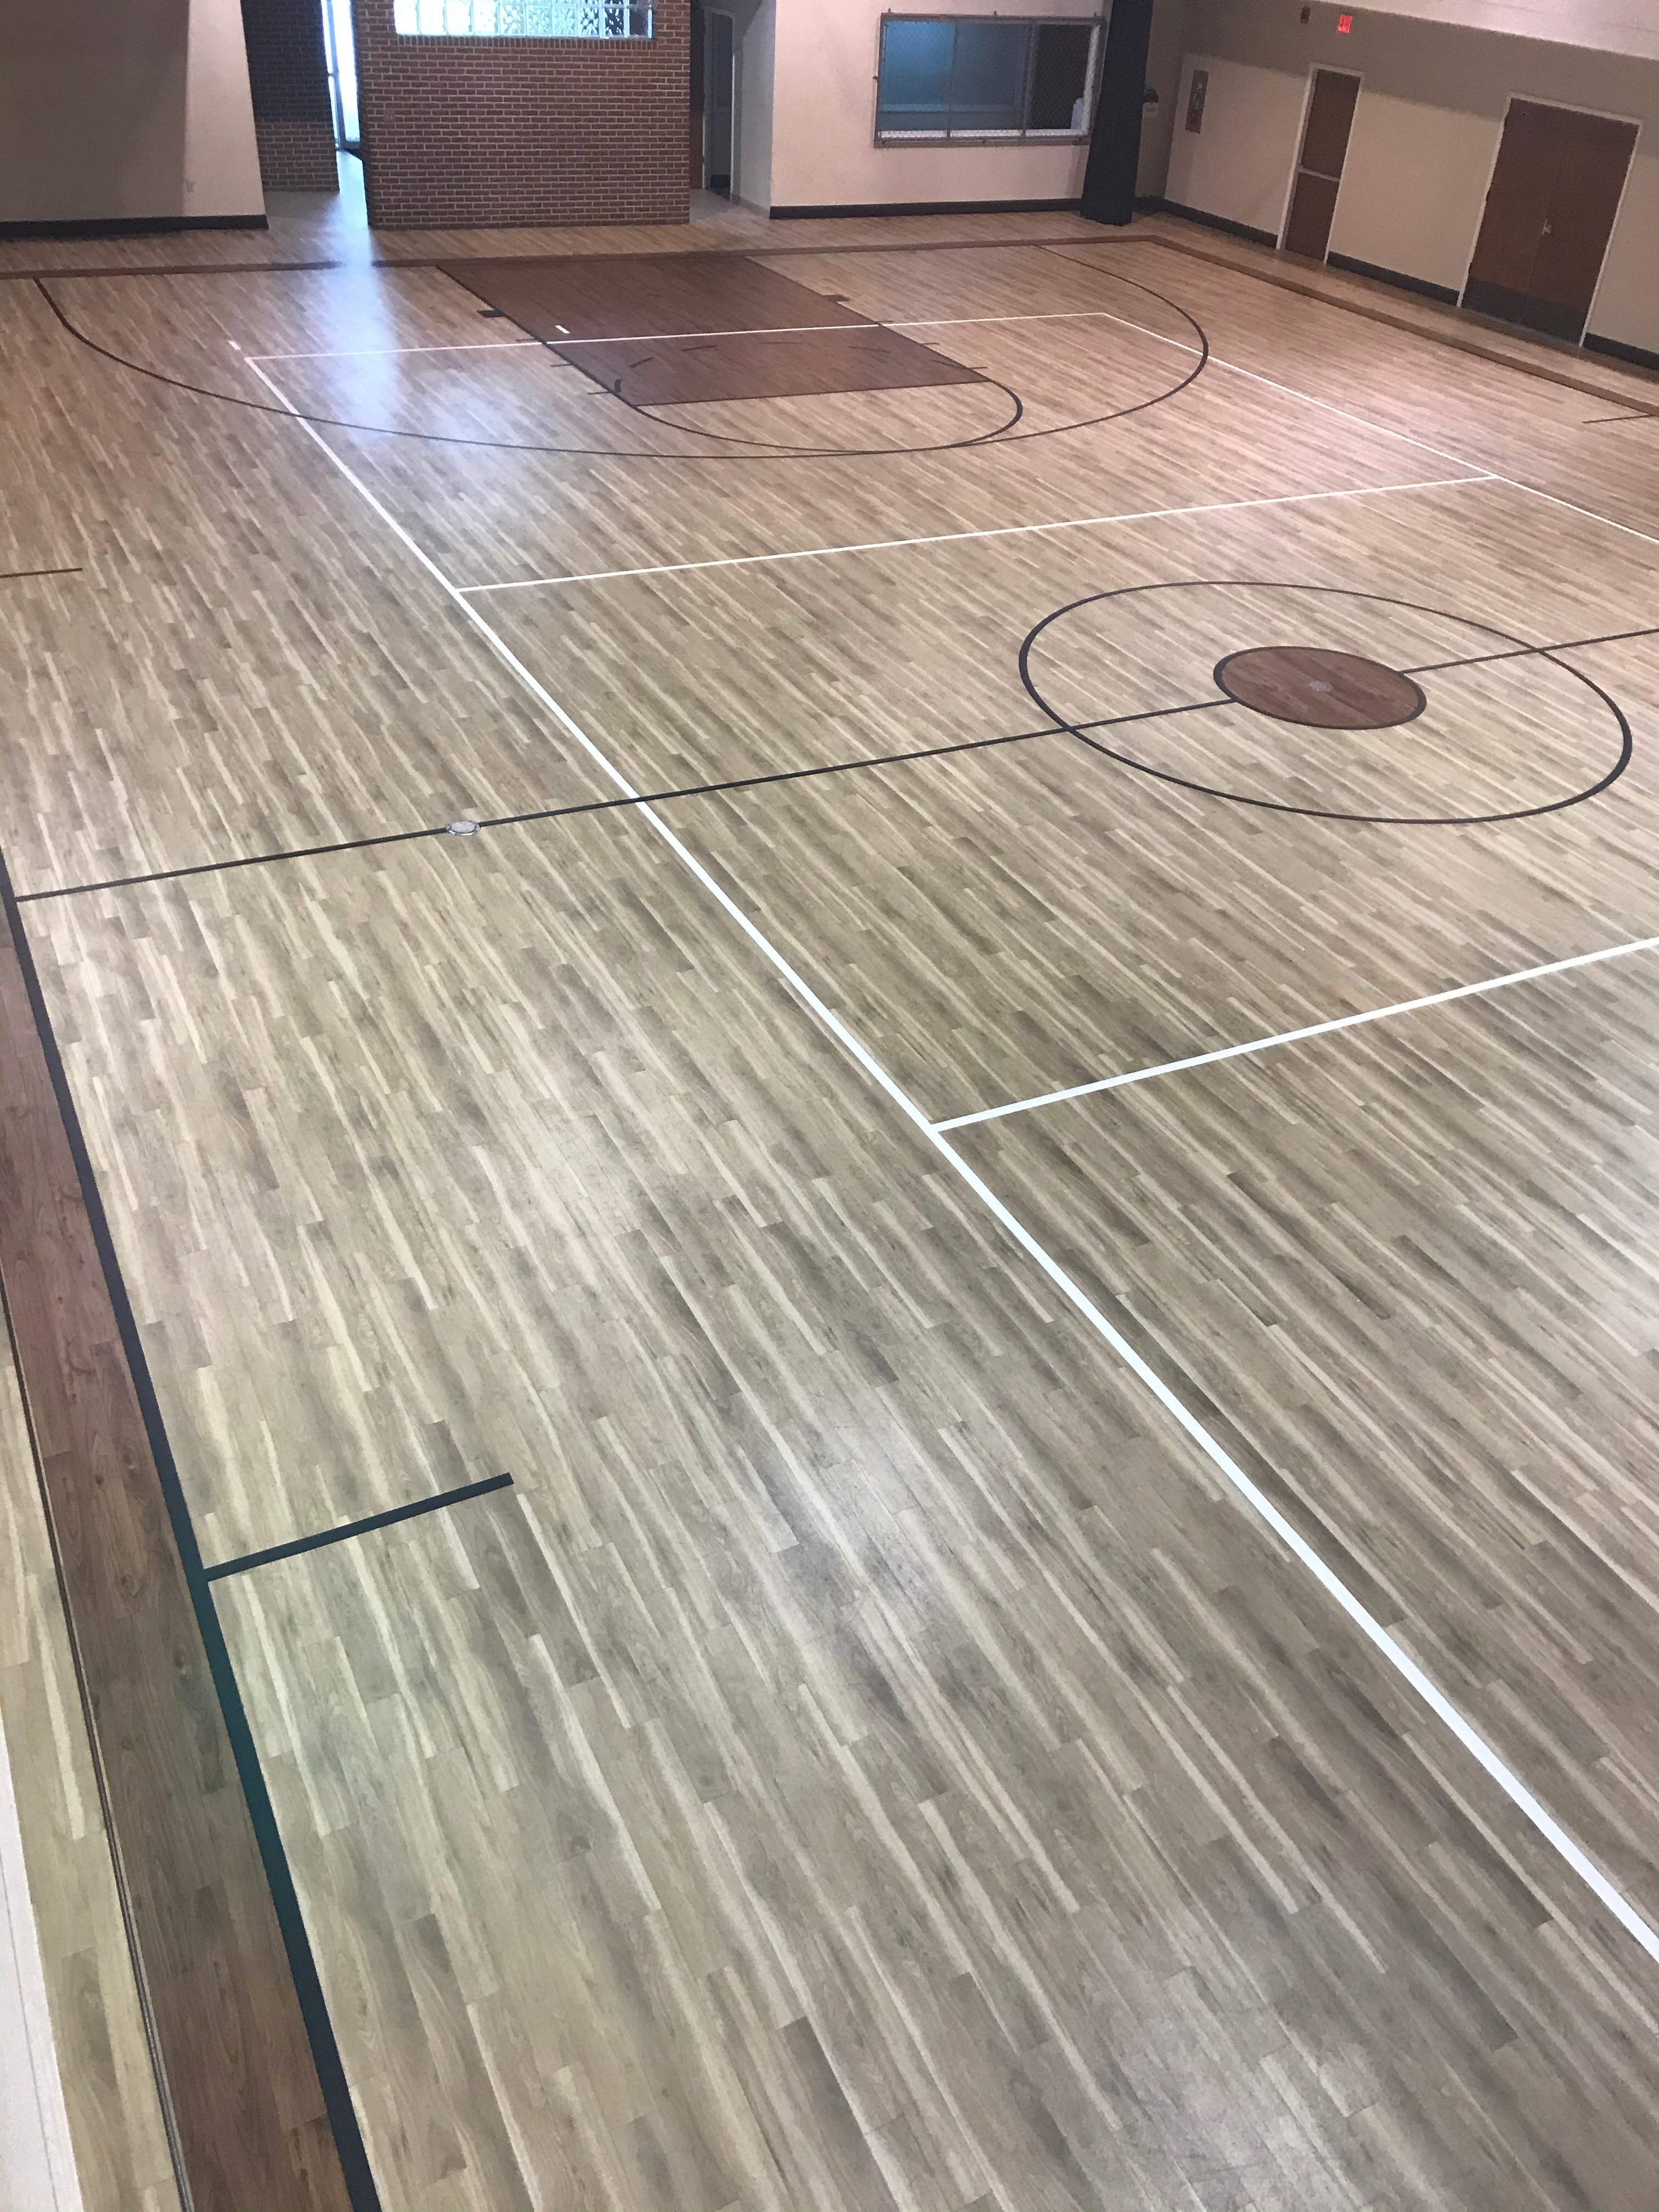 What Is The Best Flooring For a Basketball Court?